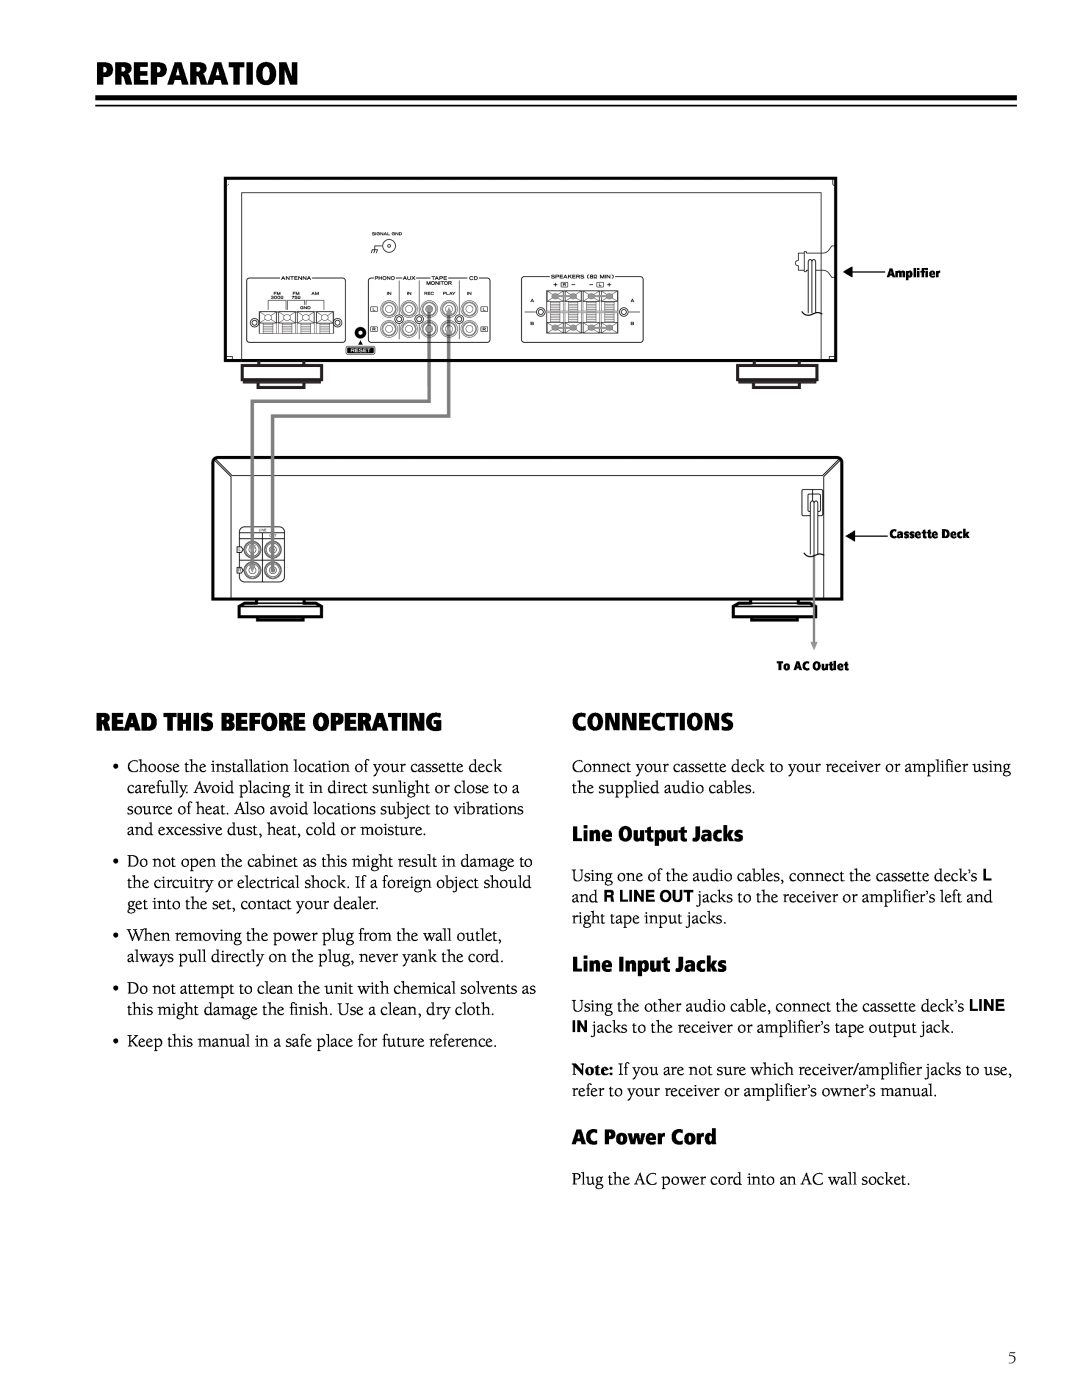 RCA SCT-550 Preparation, Read This Before Operating, Connections, Line Output Jacks, Line Input Jacks, AC Power Cord 